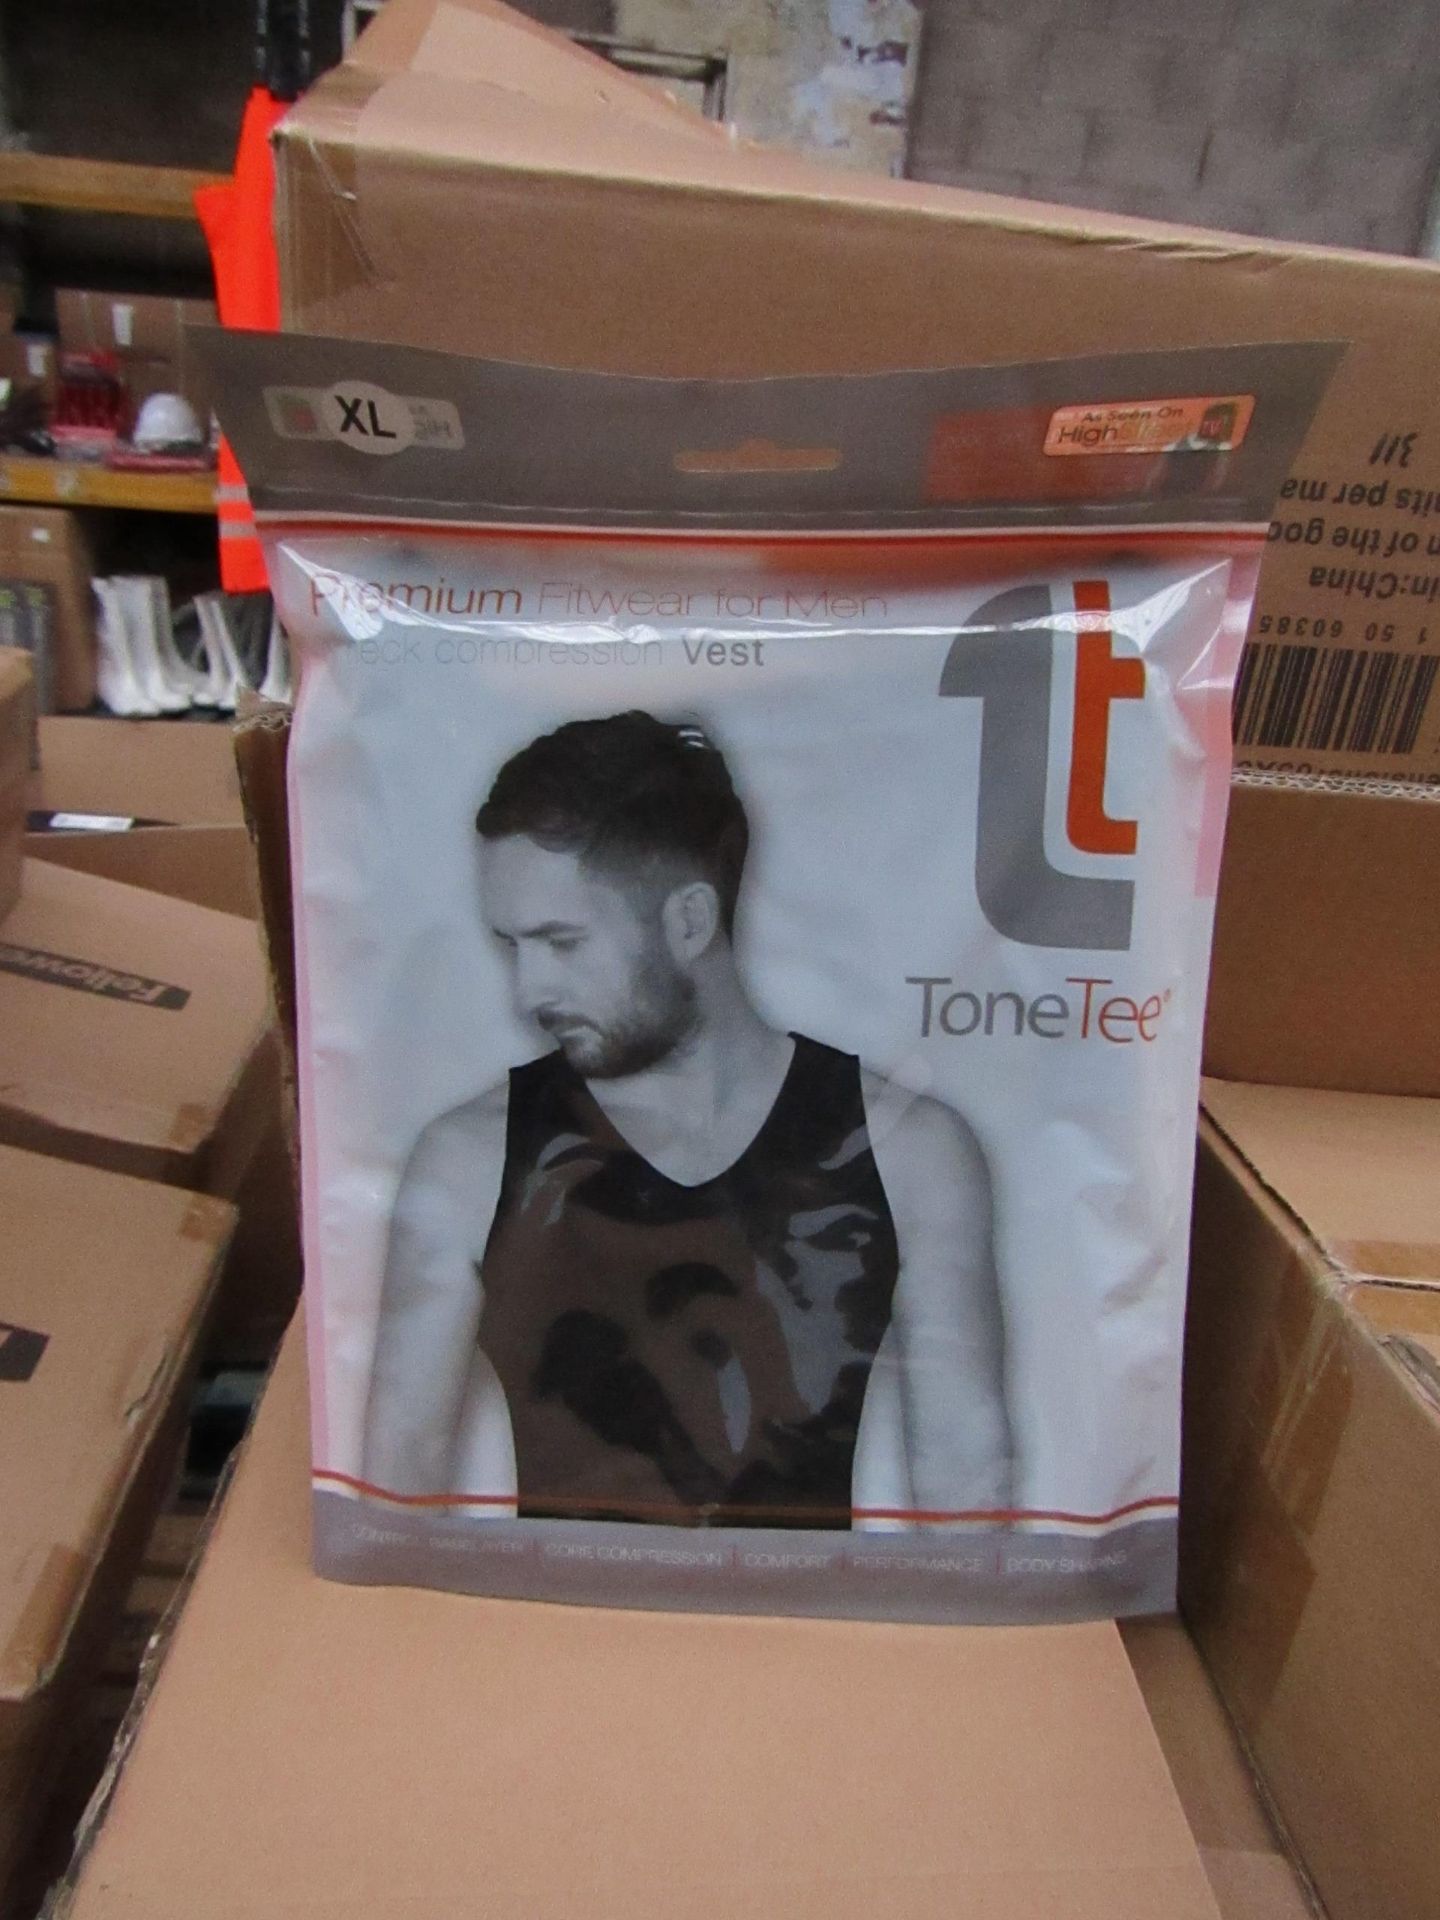 | 1X | PALLET OF APPROX 336 TONE TEE COMPRESSION VESTS, NEW IN PACKAGING SIZE XL, APPEARS TO BE BOTH